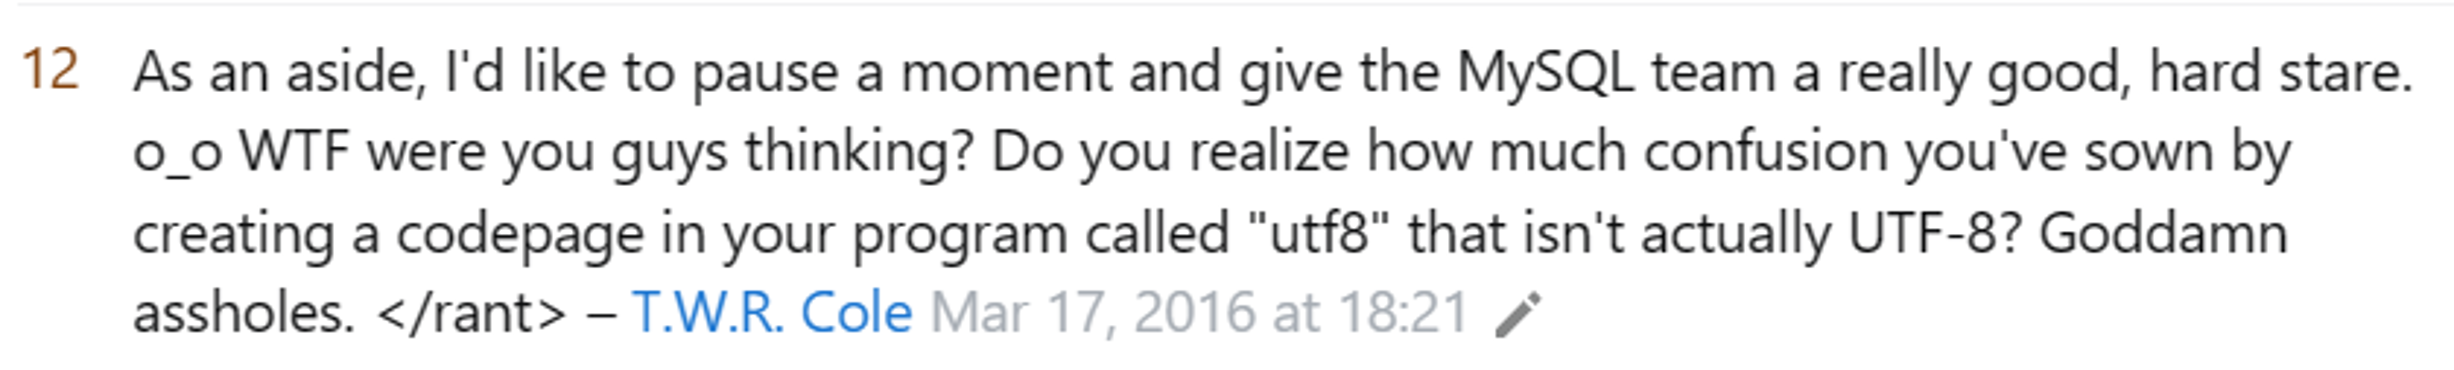 As an aside, I'd like to pause a moment and give the MySQL team a really good, hard stare. o_o WTF were you guys thinking? Do you realize how much confusion you've sown by creating a codepage in your program called "utf8" that isn't actually UTF-8? Goddamn assholes. </rant>